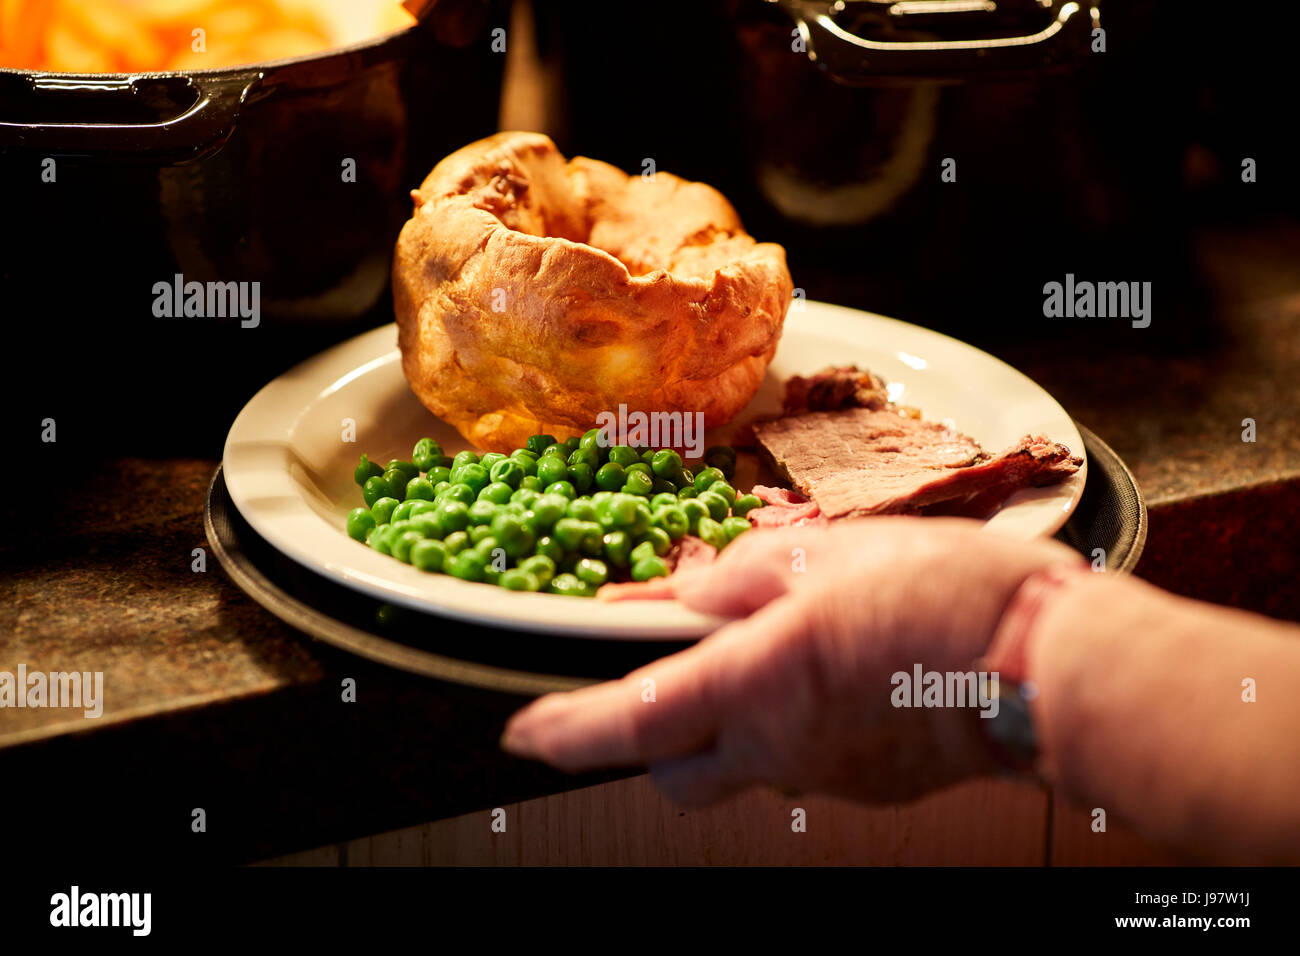 Carvery pub, traditional sunday luck on a plate Stock Photo